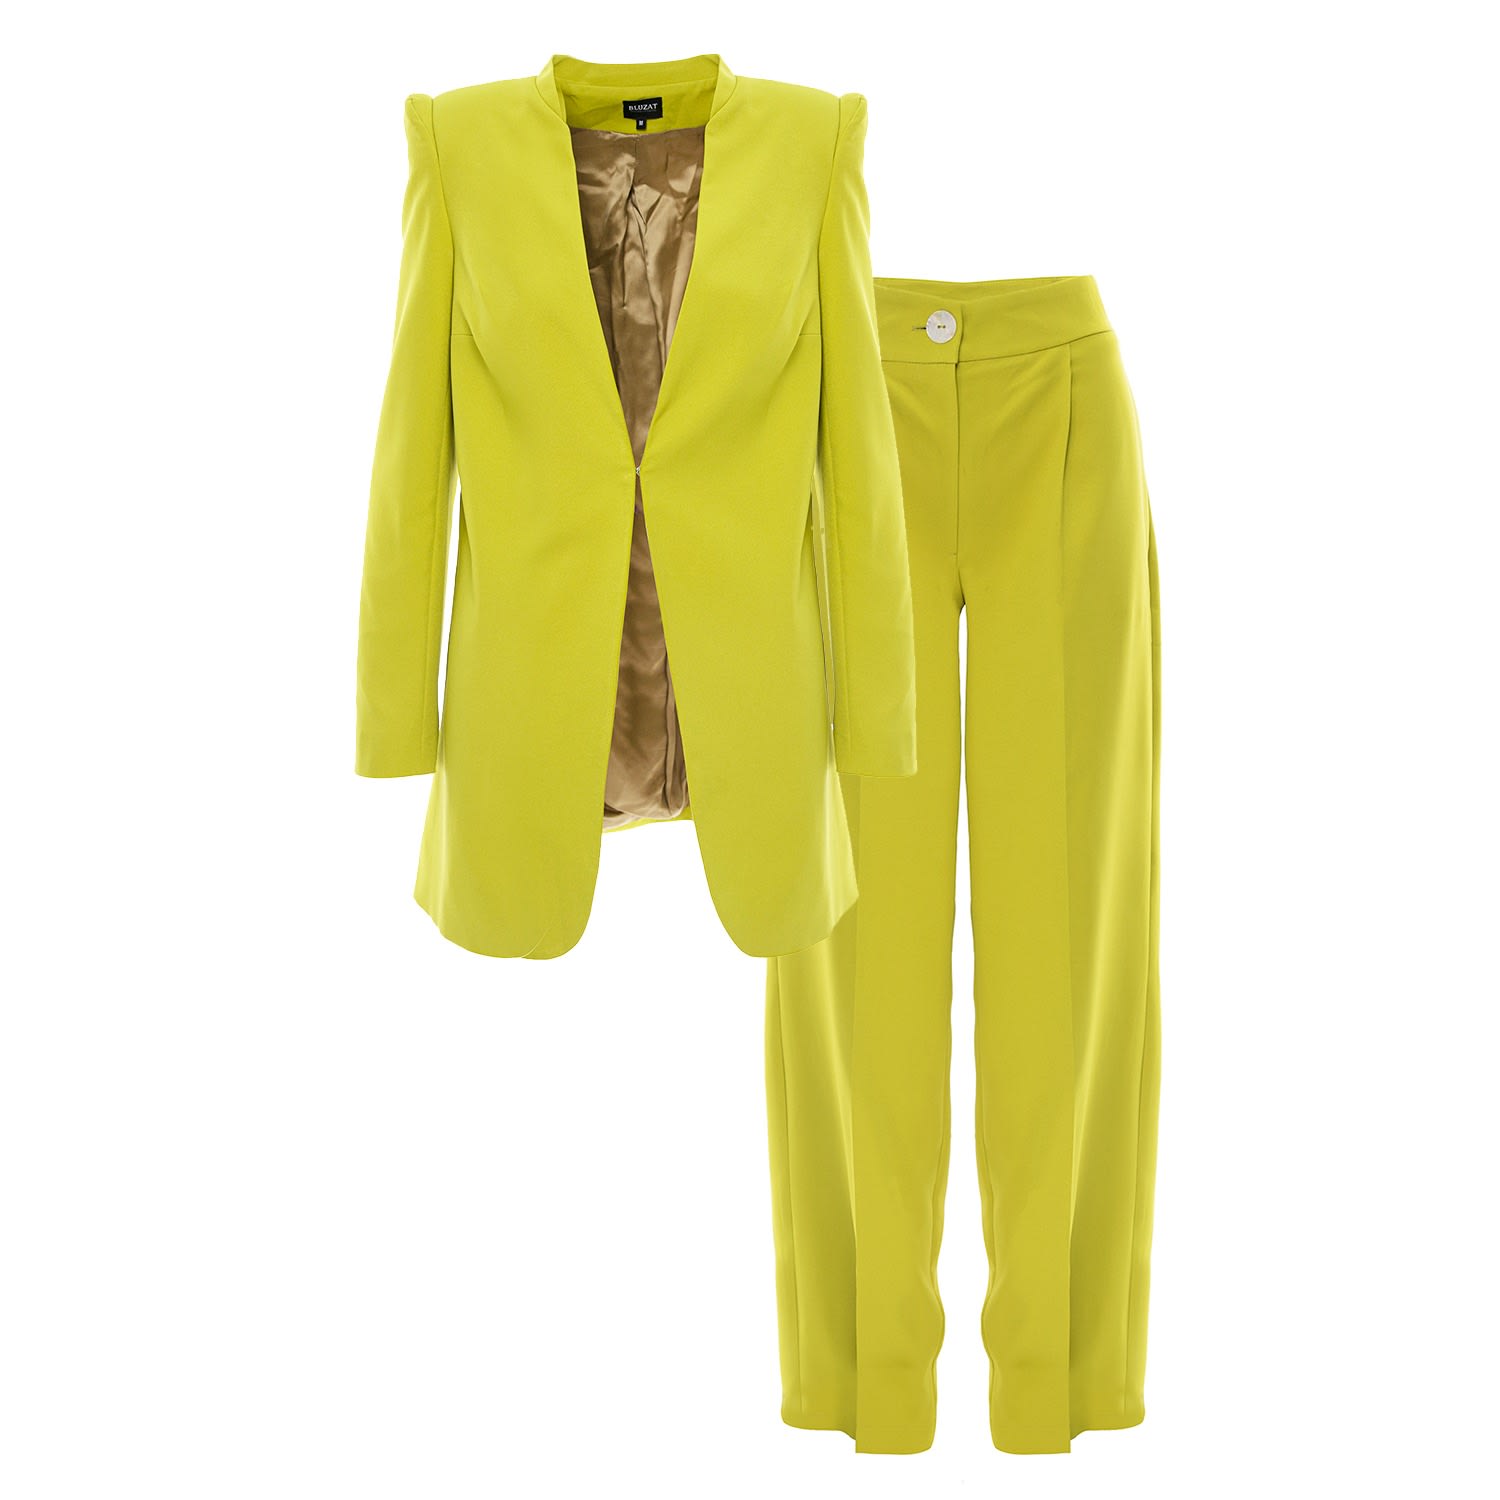 Women’s Green Lime Suit With Sharped Shoulders Blazer Extra Small Bluzat